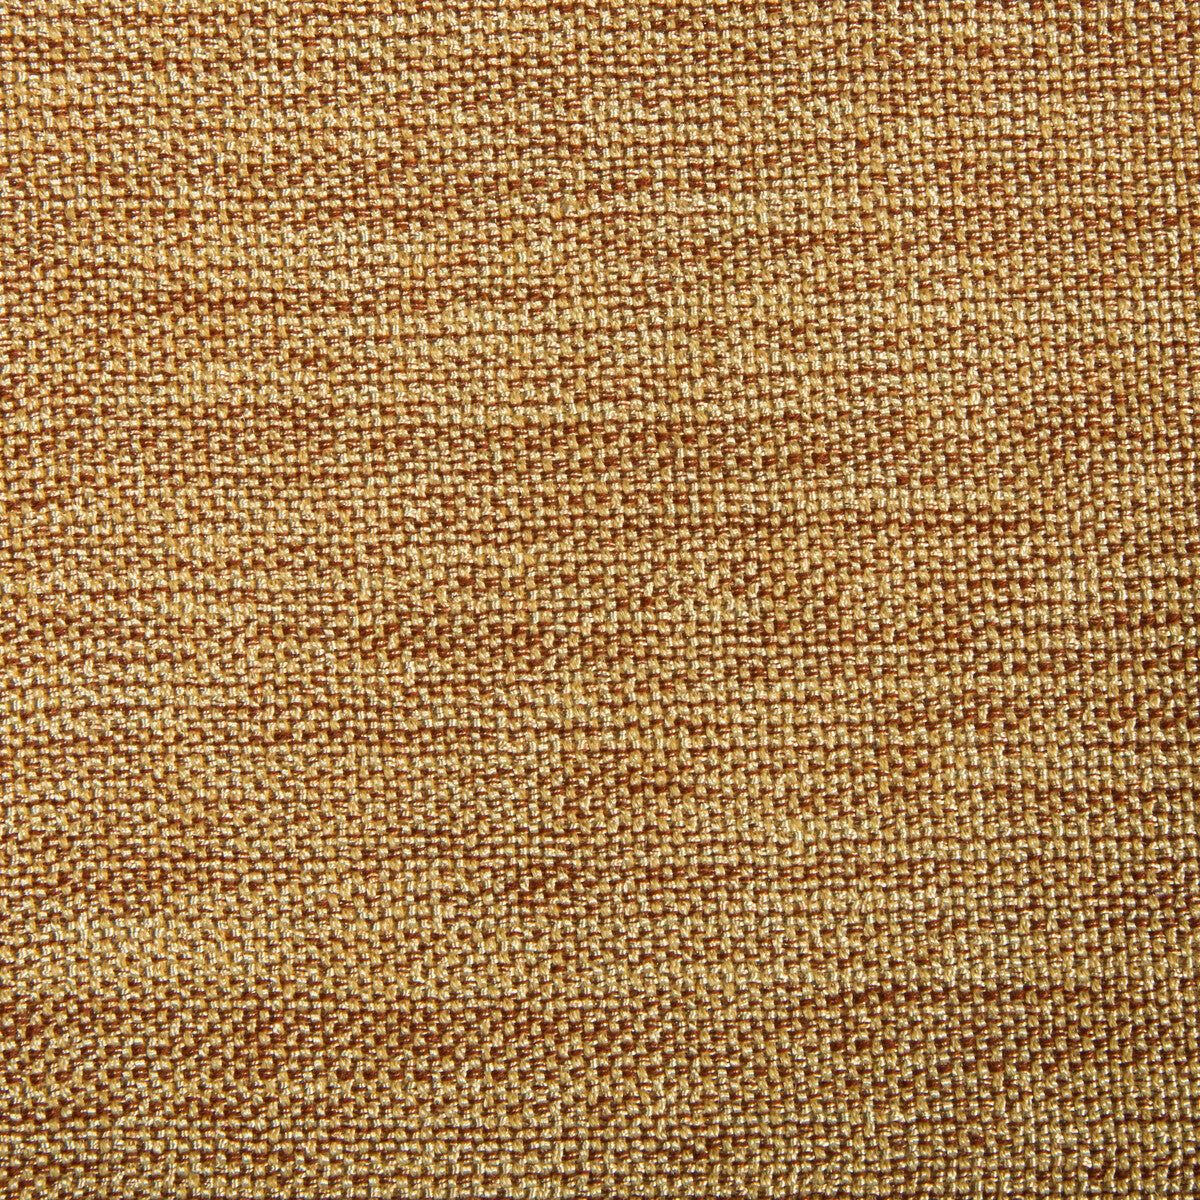 Kravet Contract fabric in 4458-1624 color - pattern 4458.1624.0 - by Kravet Contract